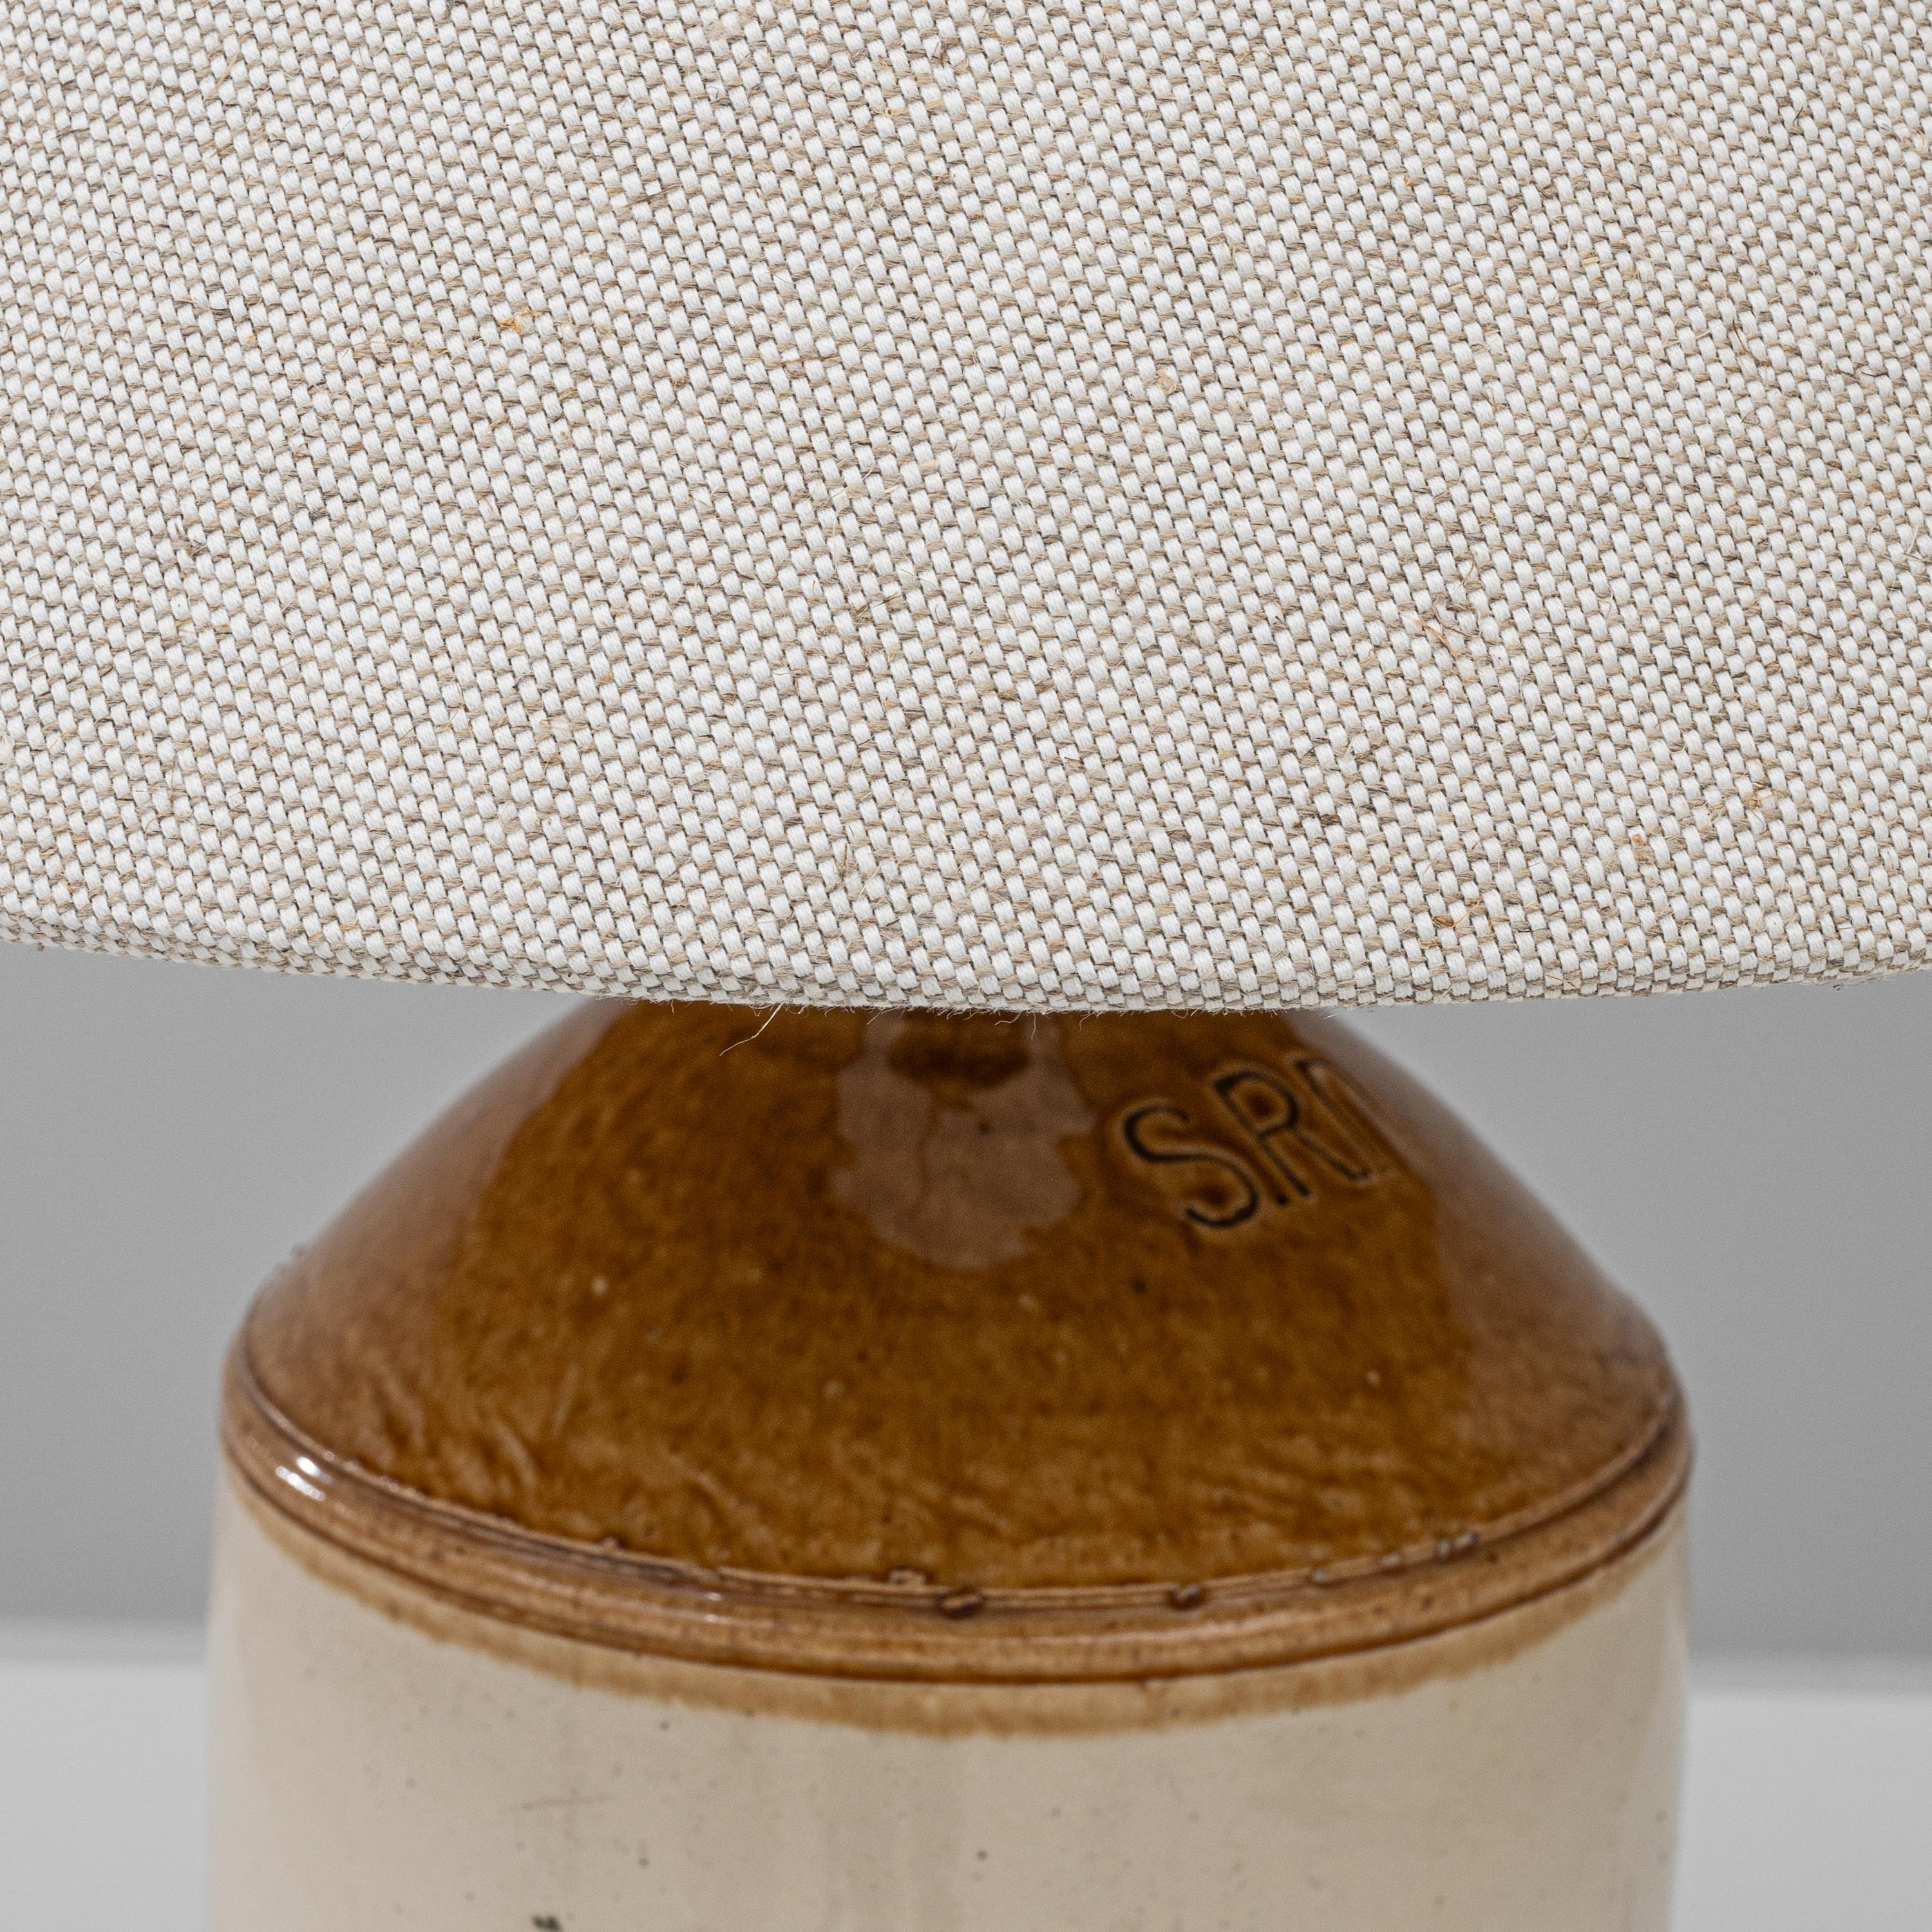 Early 20th Century British Ceramic Table Lamp For Sale 5